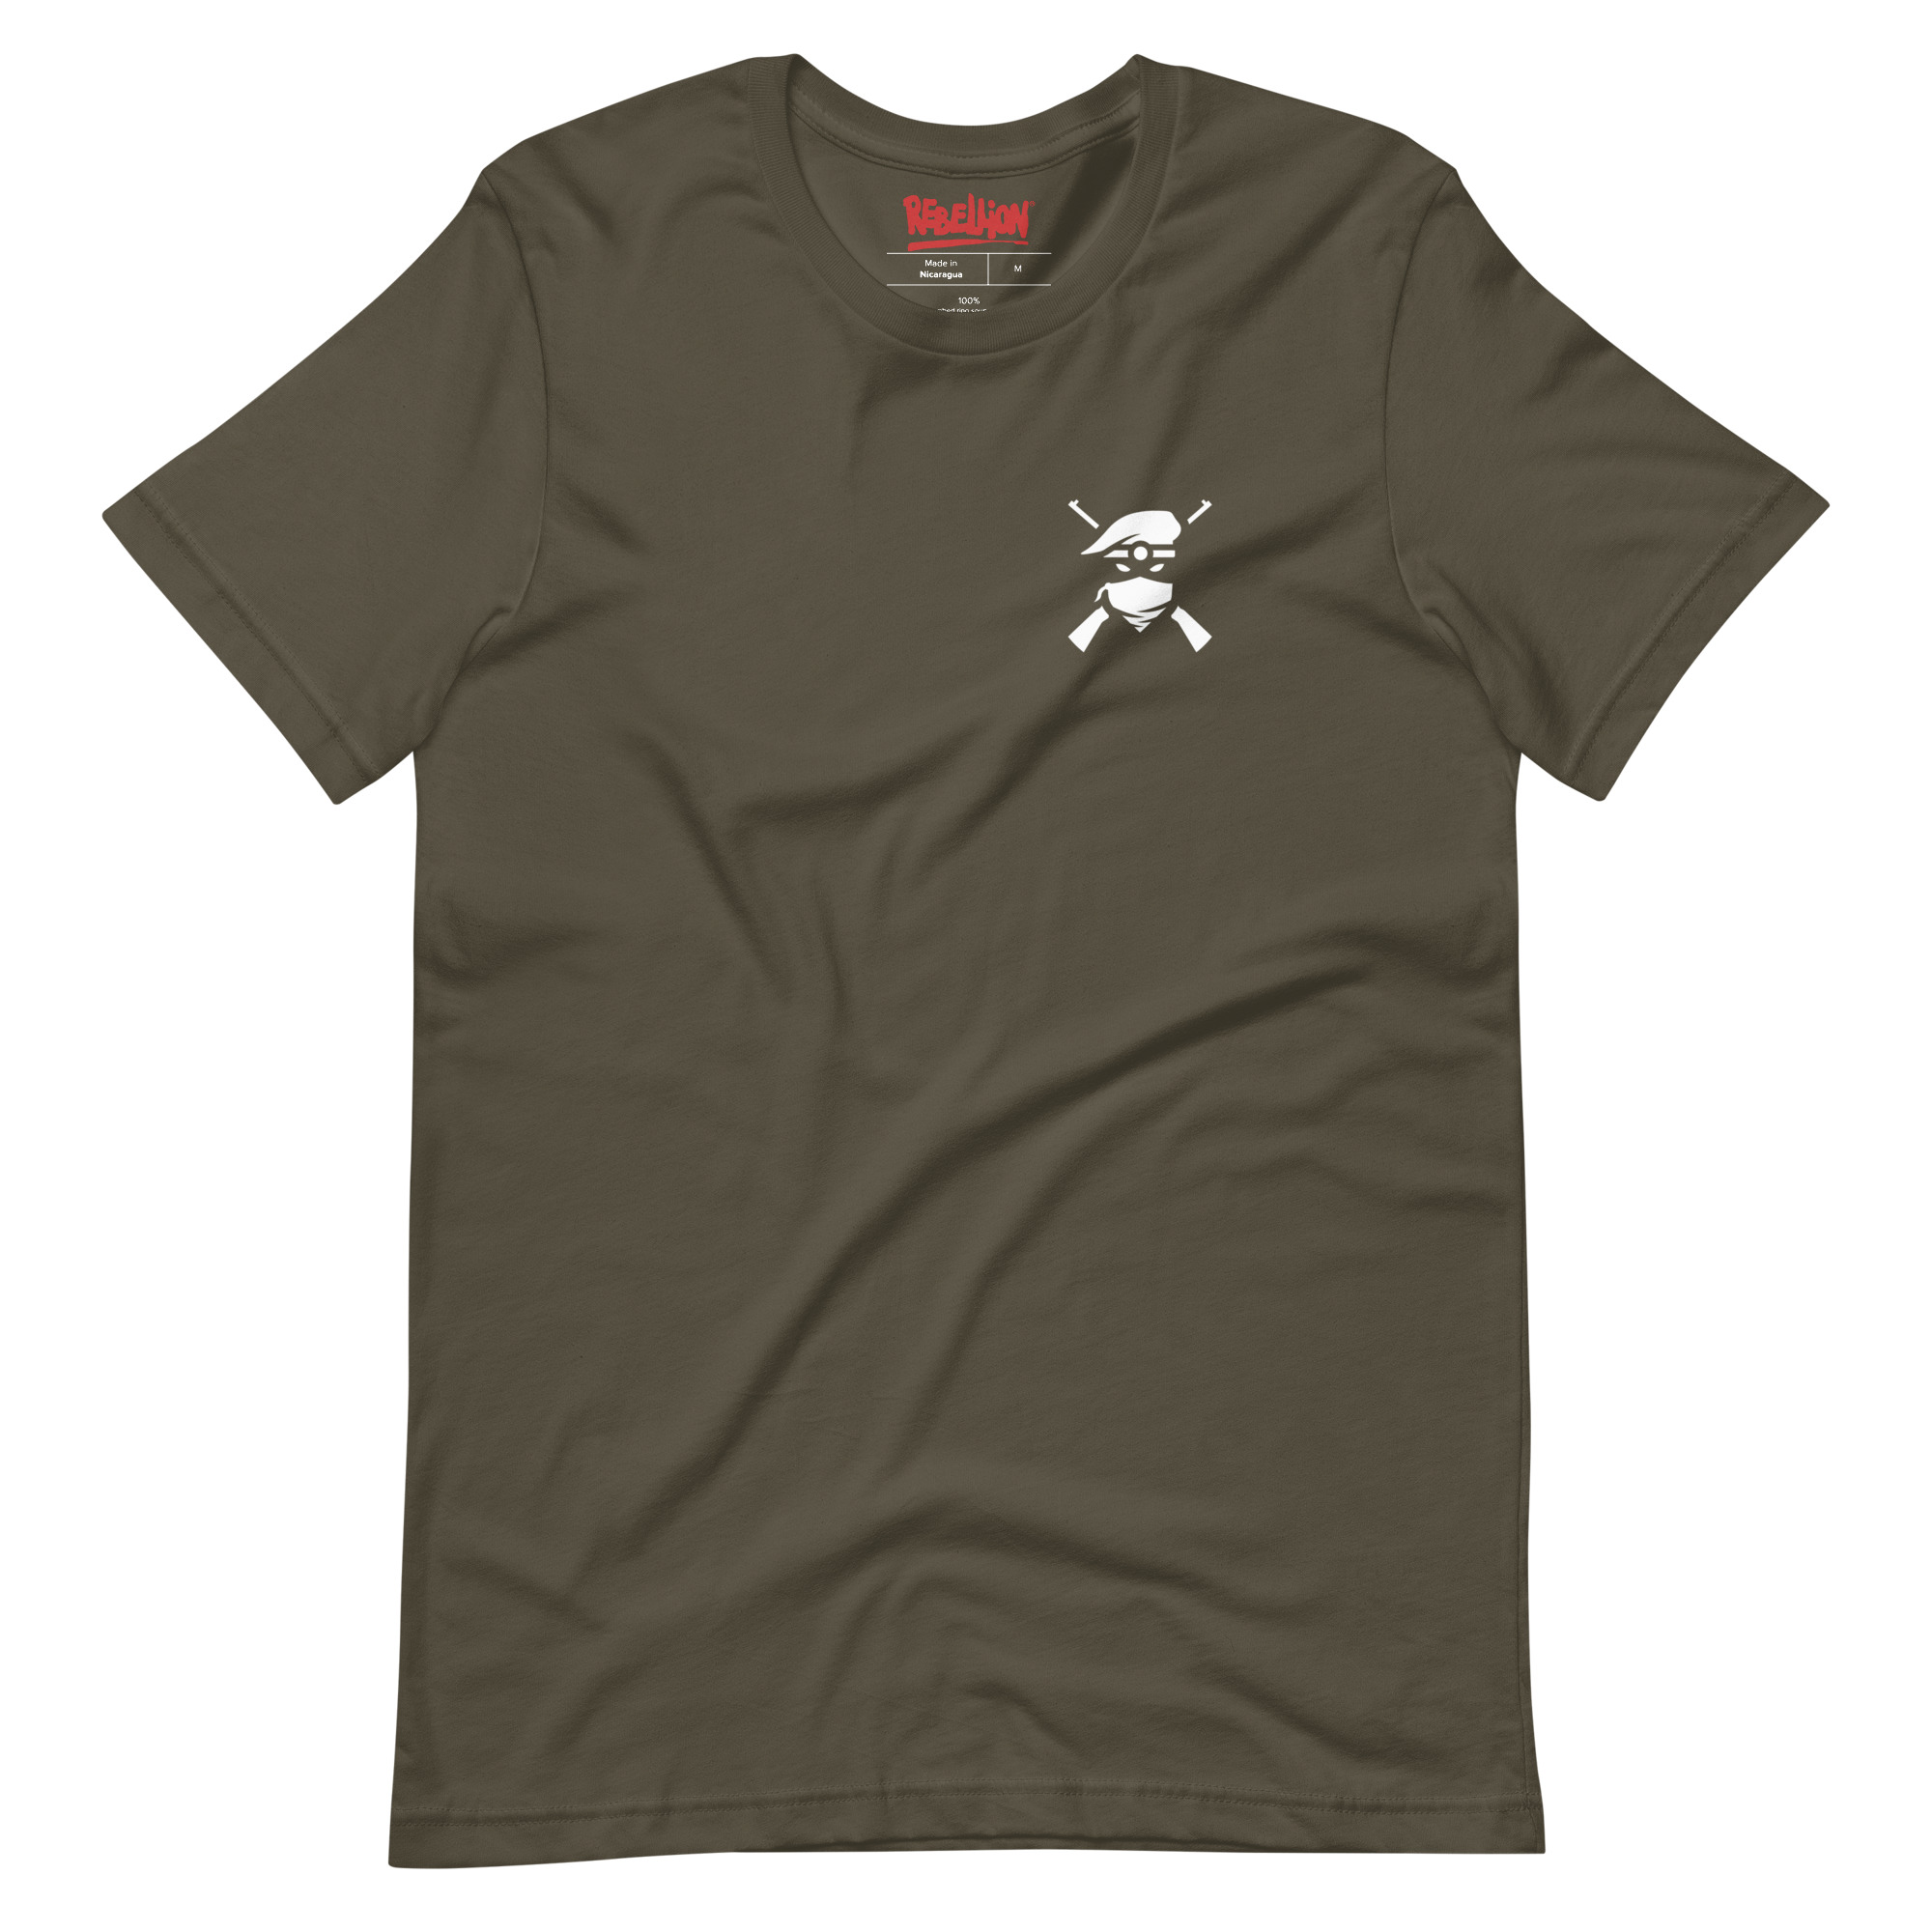 Image of a brown coloured Sniper Elite 5 t-shirt featuring a small Renegades emblem on the left breast pocket